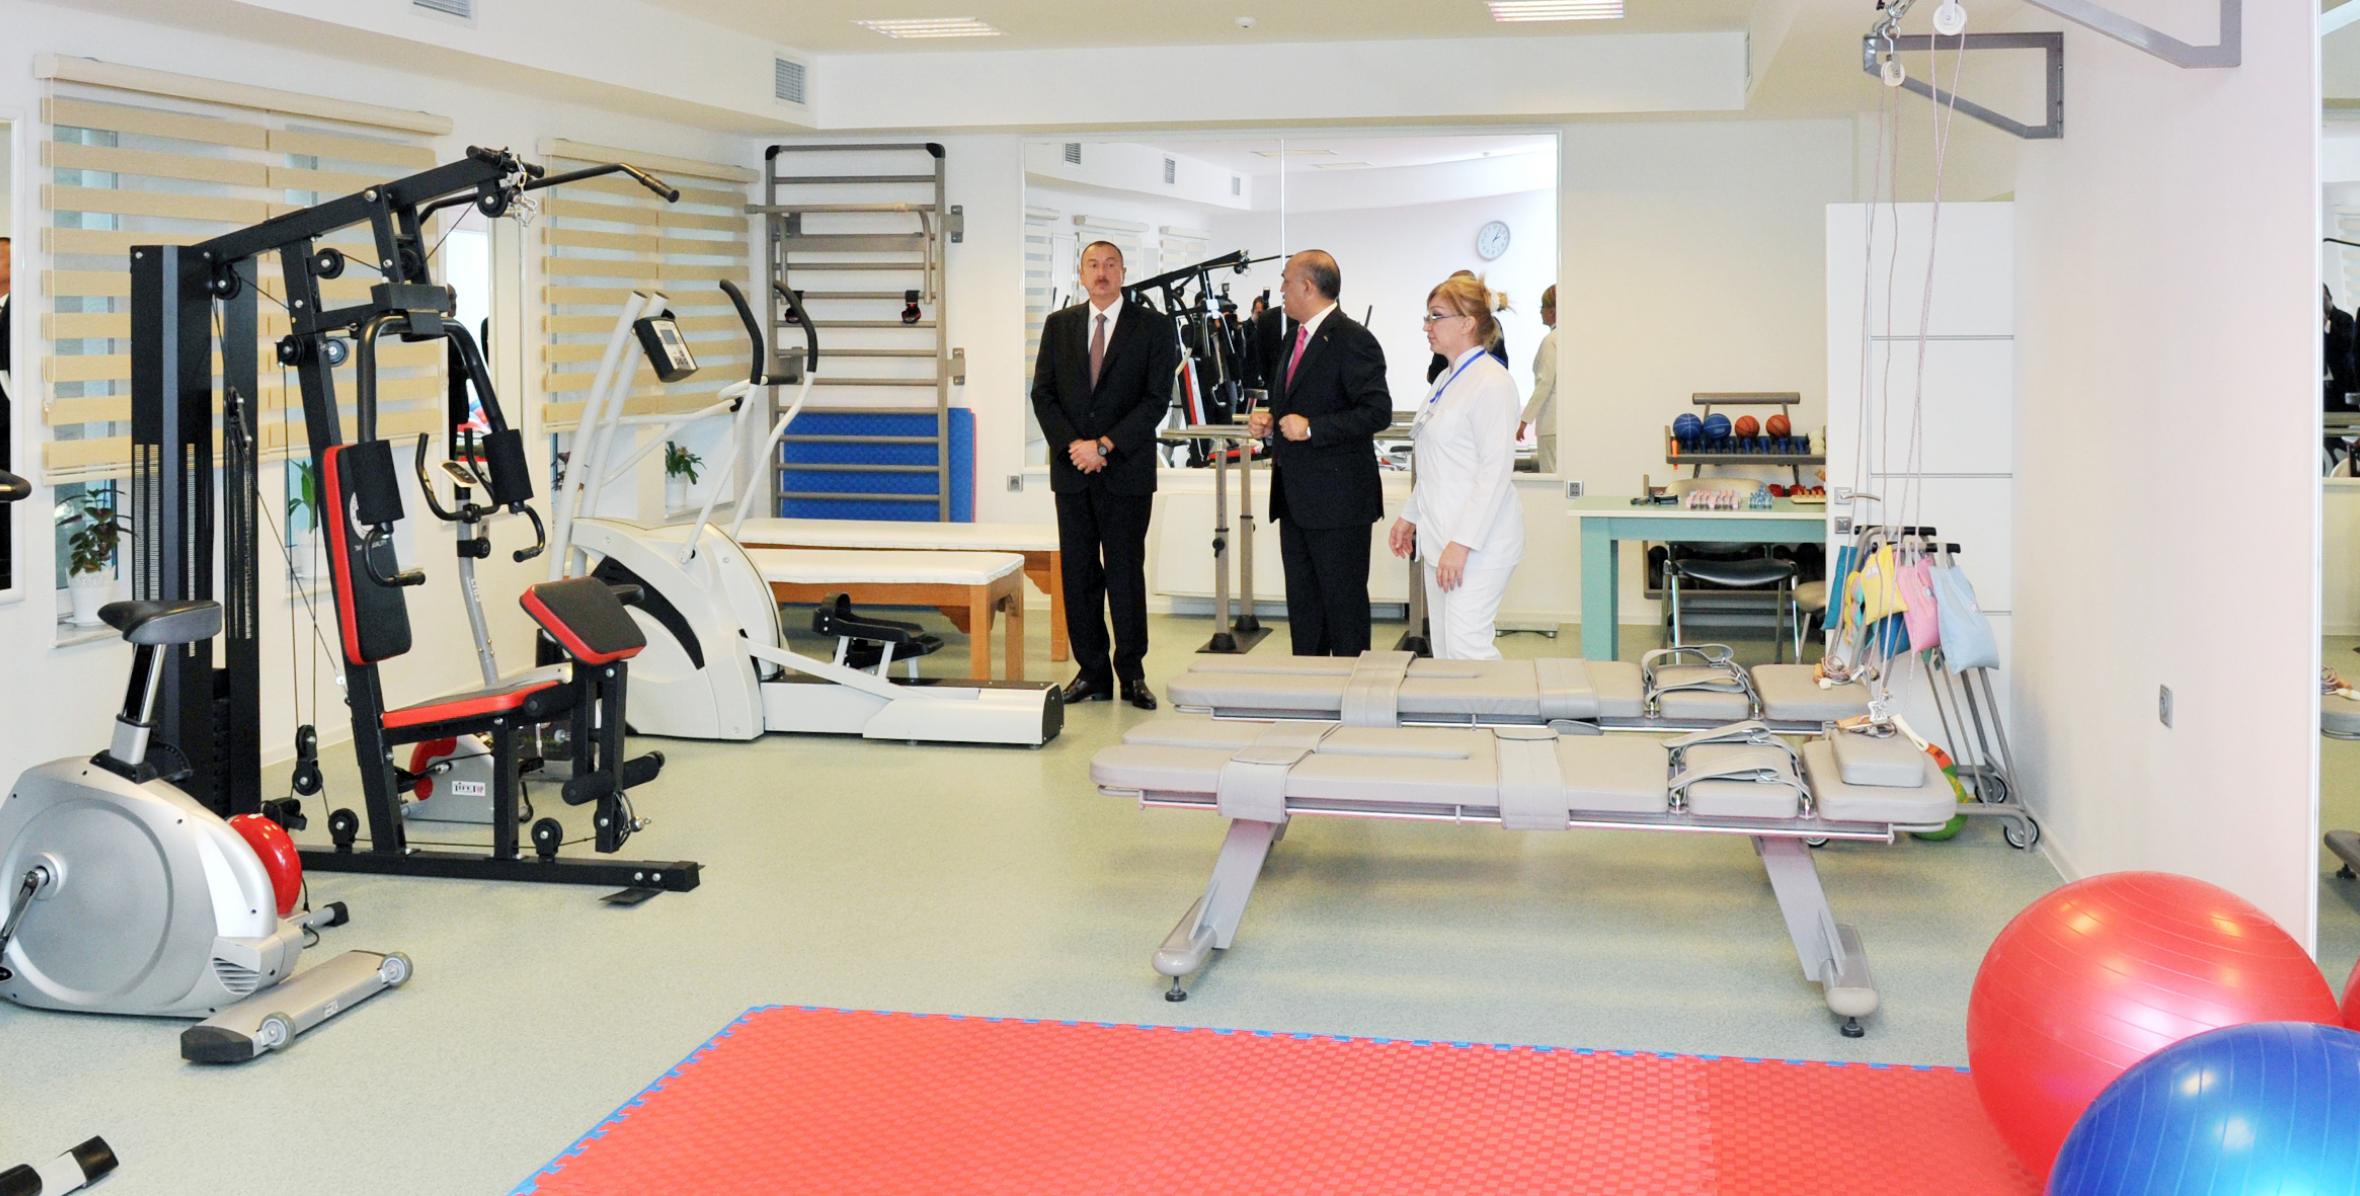 Ilham Aliyev reviewed the Rehabilitation Center for the Disabled after repair and reconstruction in Baku